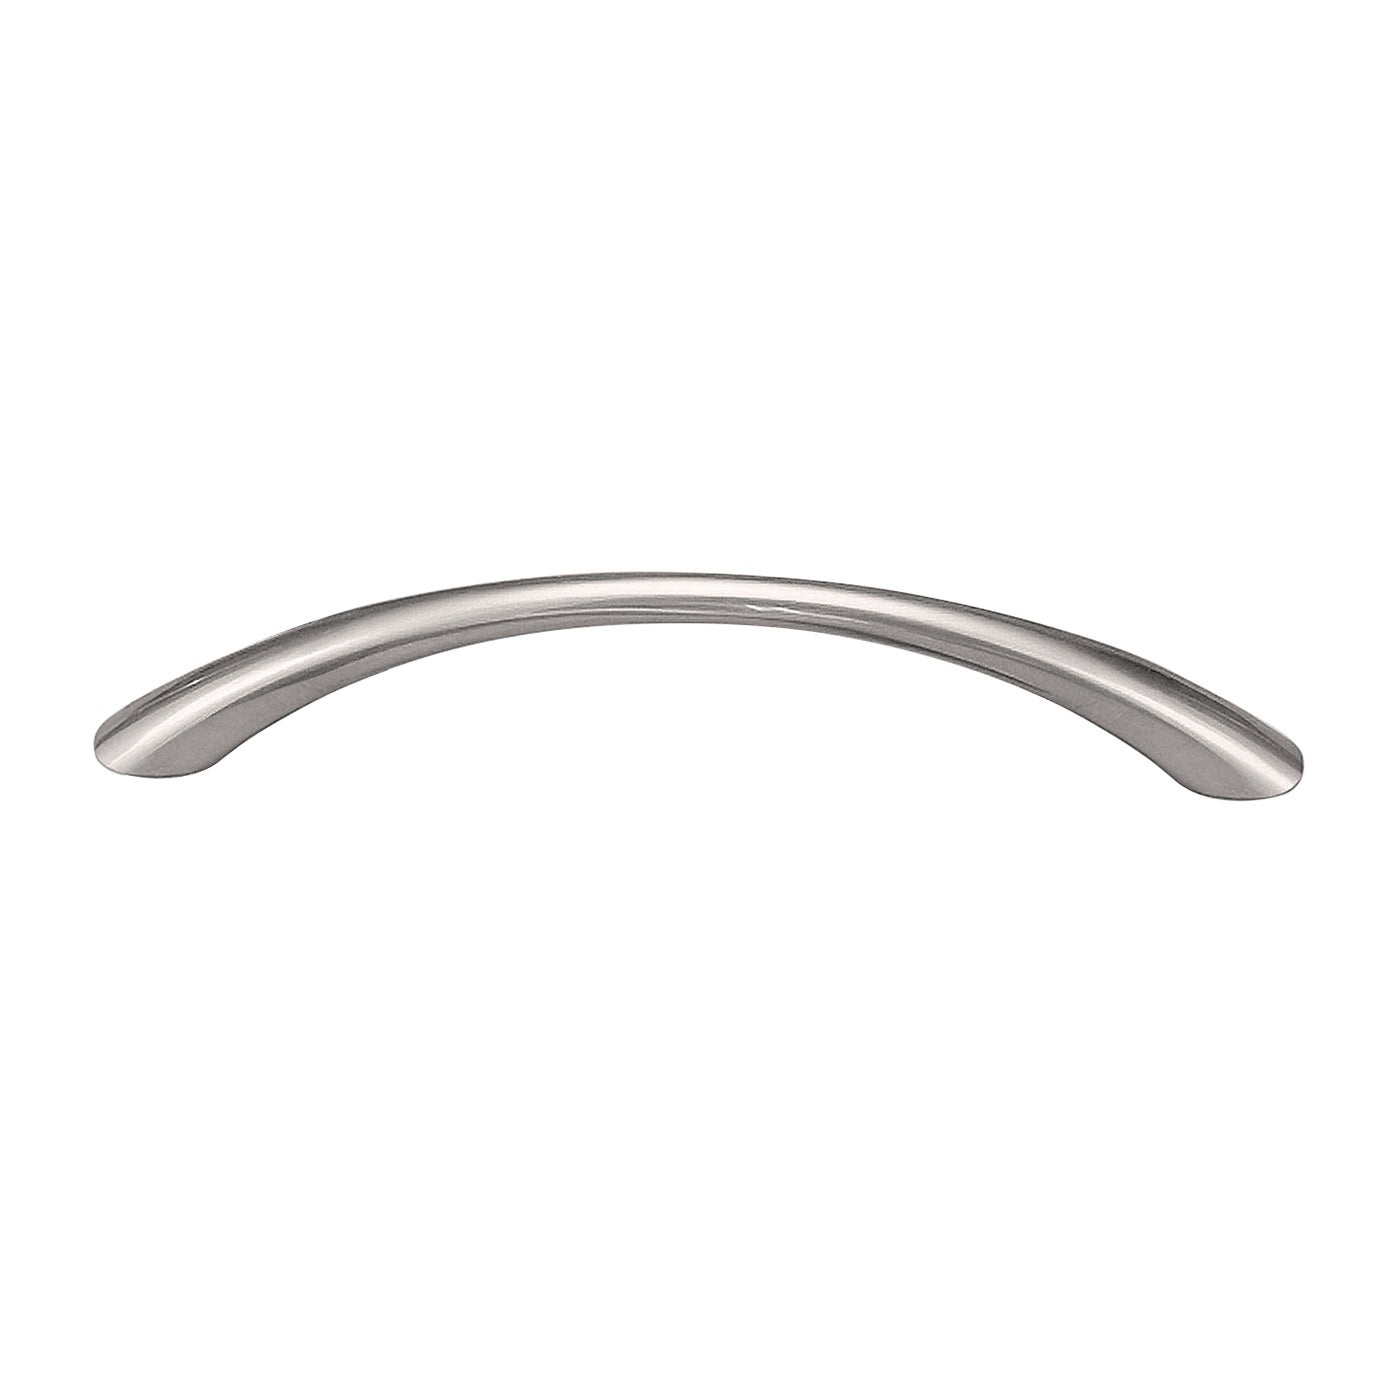 Kethy Tapered Bow Cabinet Pull Handle - Available In Various Finishes and Sizes